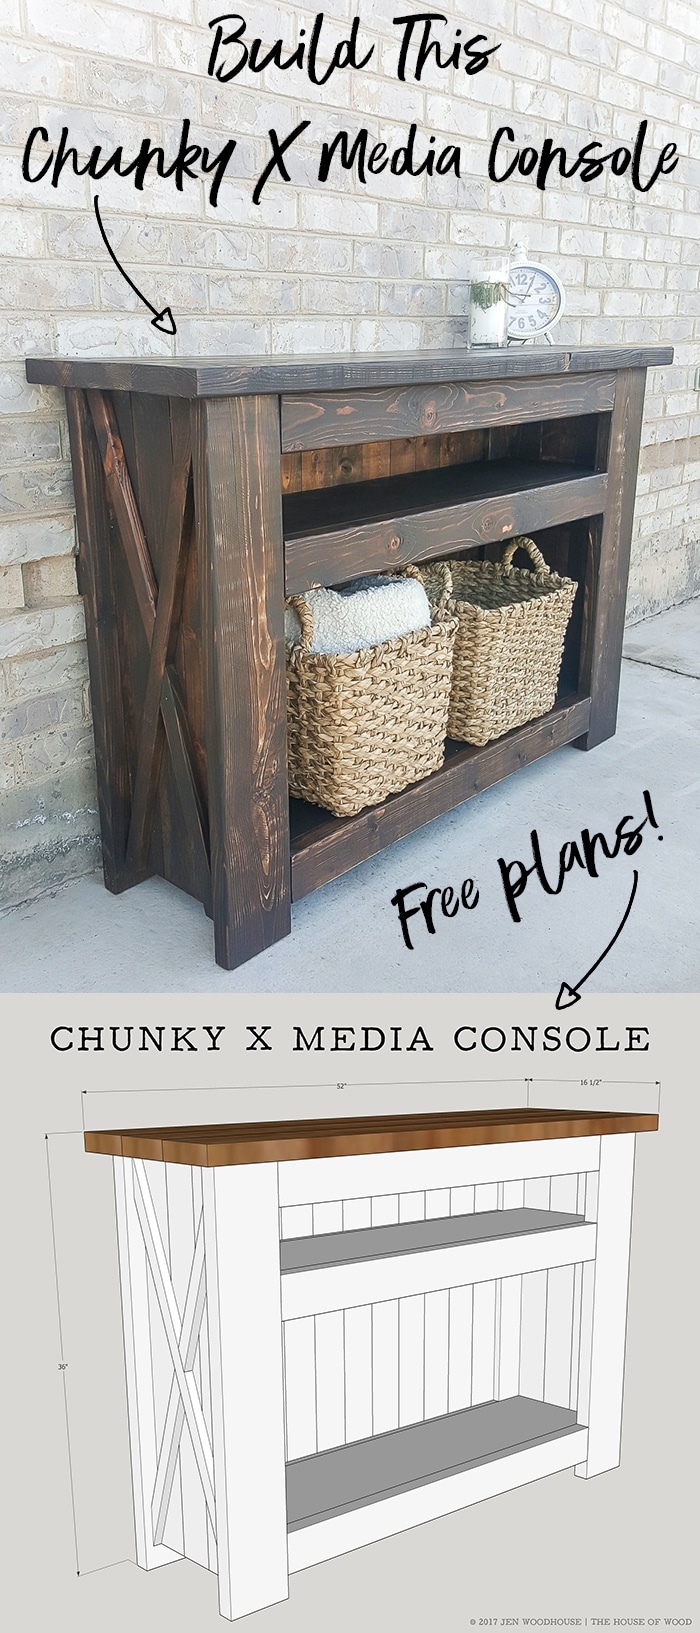 How to build a DIY chunky X media console